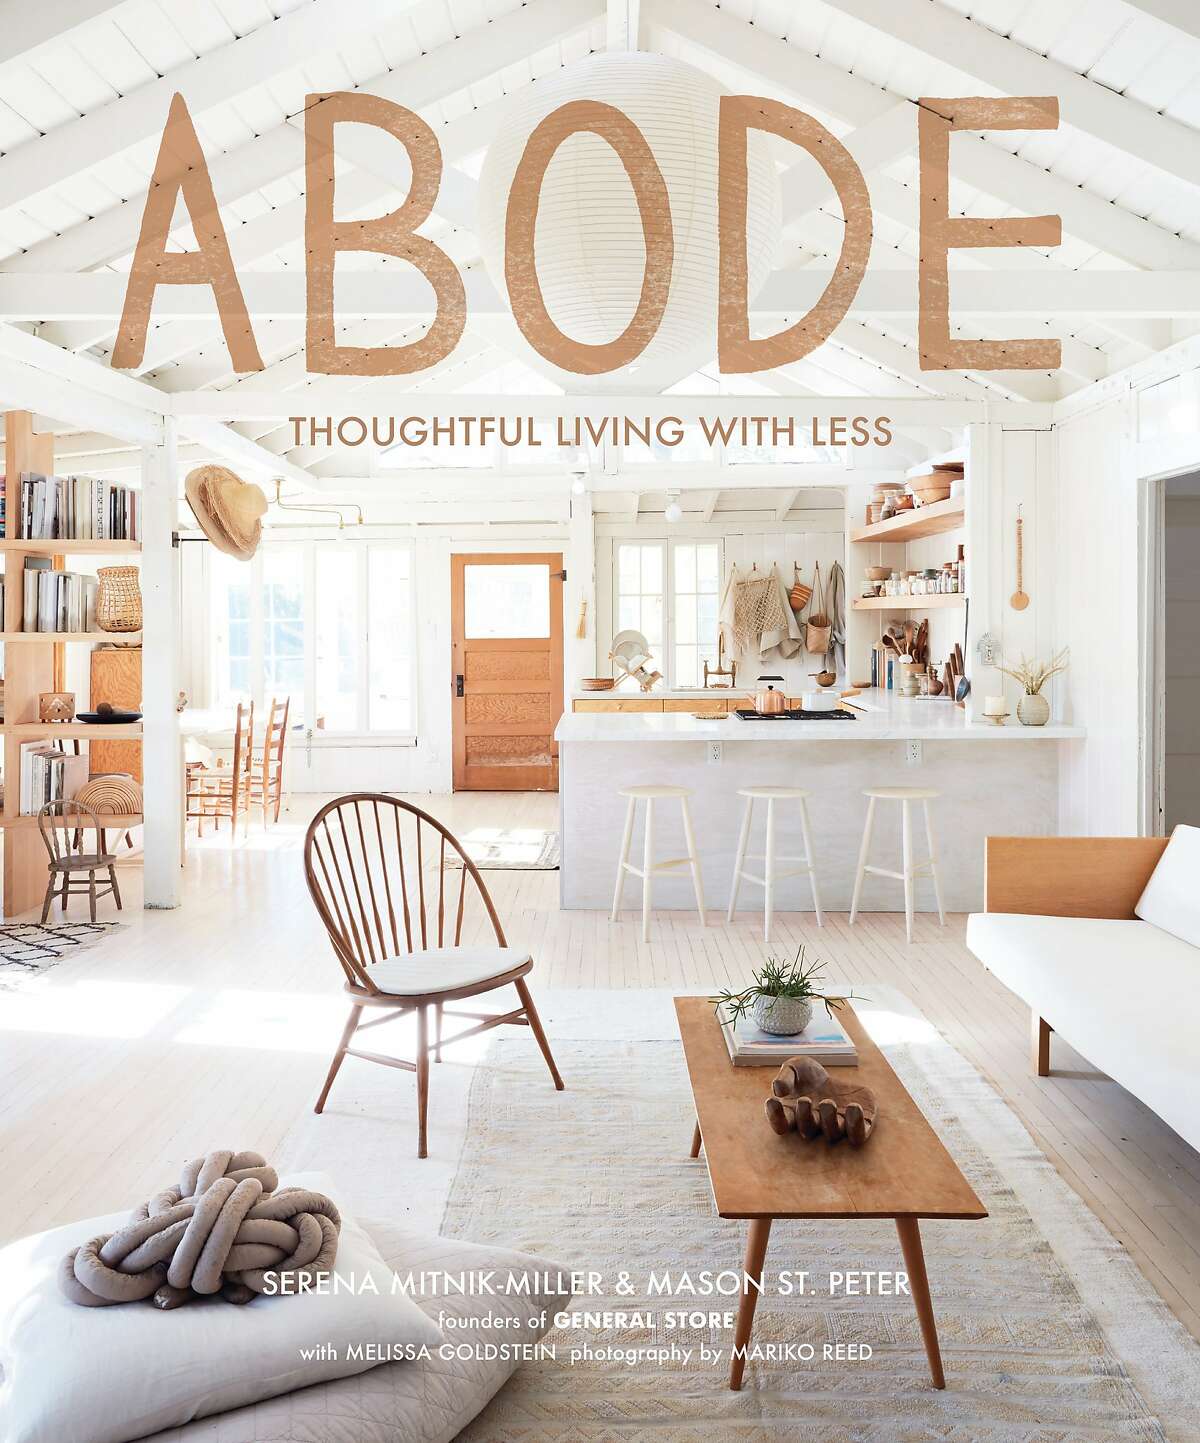 Images from "Abode: Thoughful Living With Less," (Abrams; 2019) by�Serena Mitnik-Miller, co-founder, along with her husband, Mason St. Peter, of General Store in San Francisco.